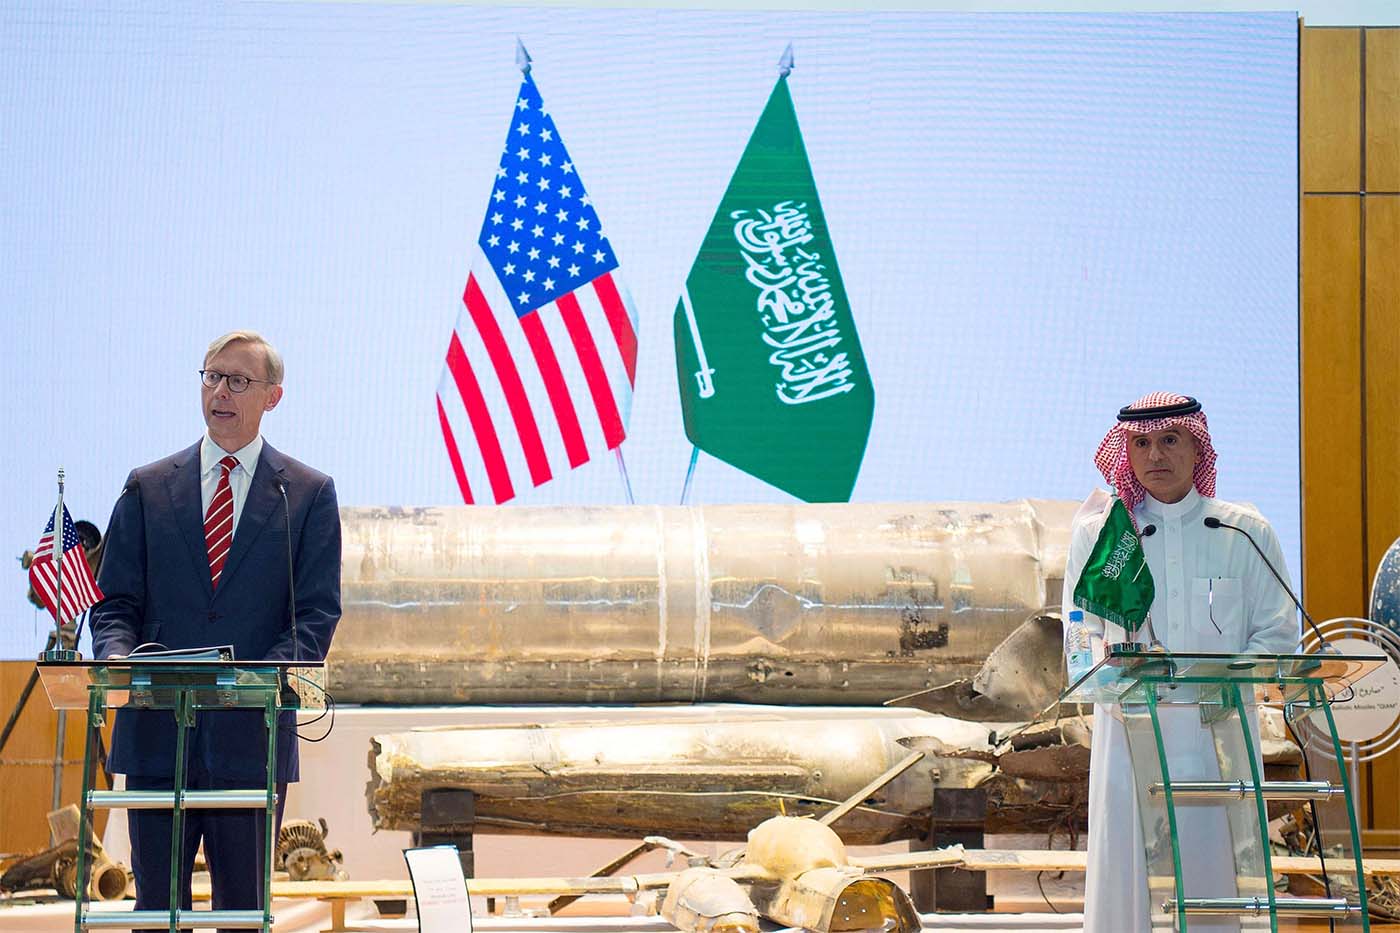 Saudi Minister of State for Foreign Affairs Adel al-Jubeir (R) and US Special Representative for Iran Brian Hook attend a joint press conference in Riyadh